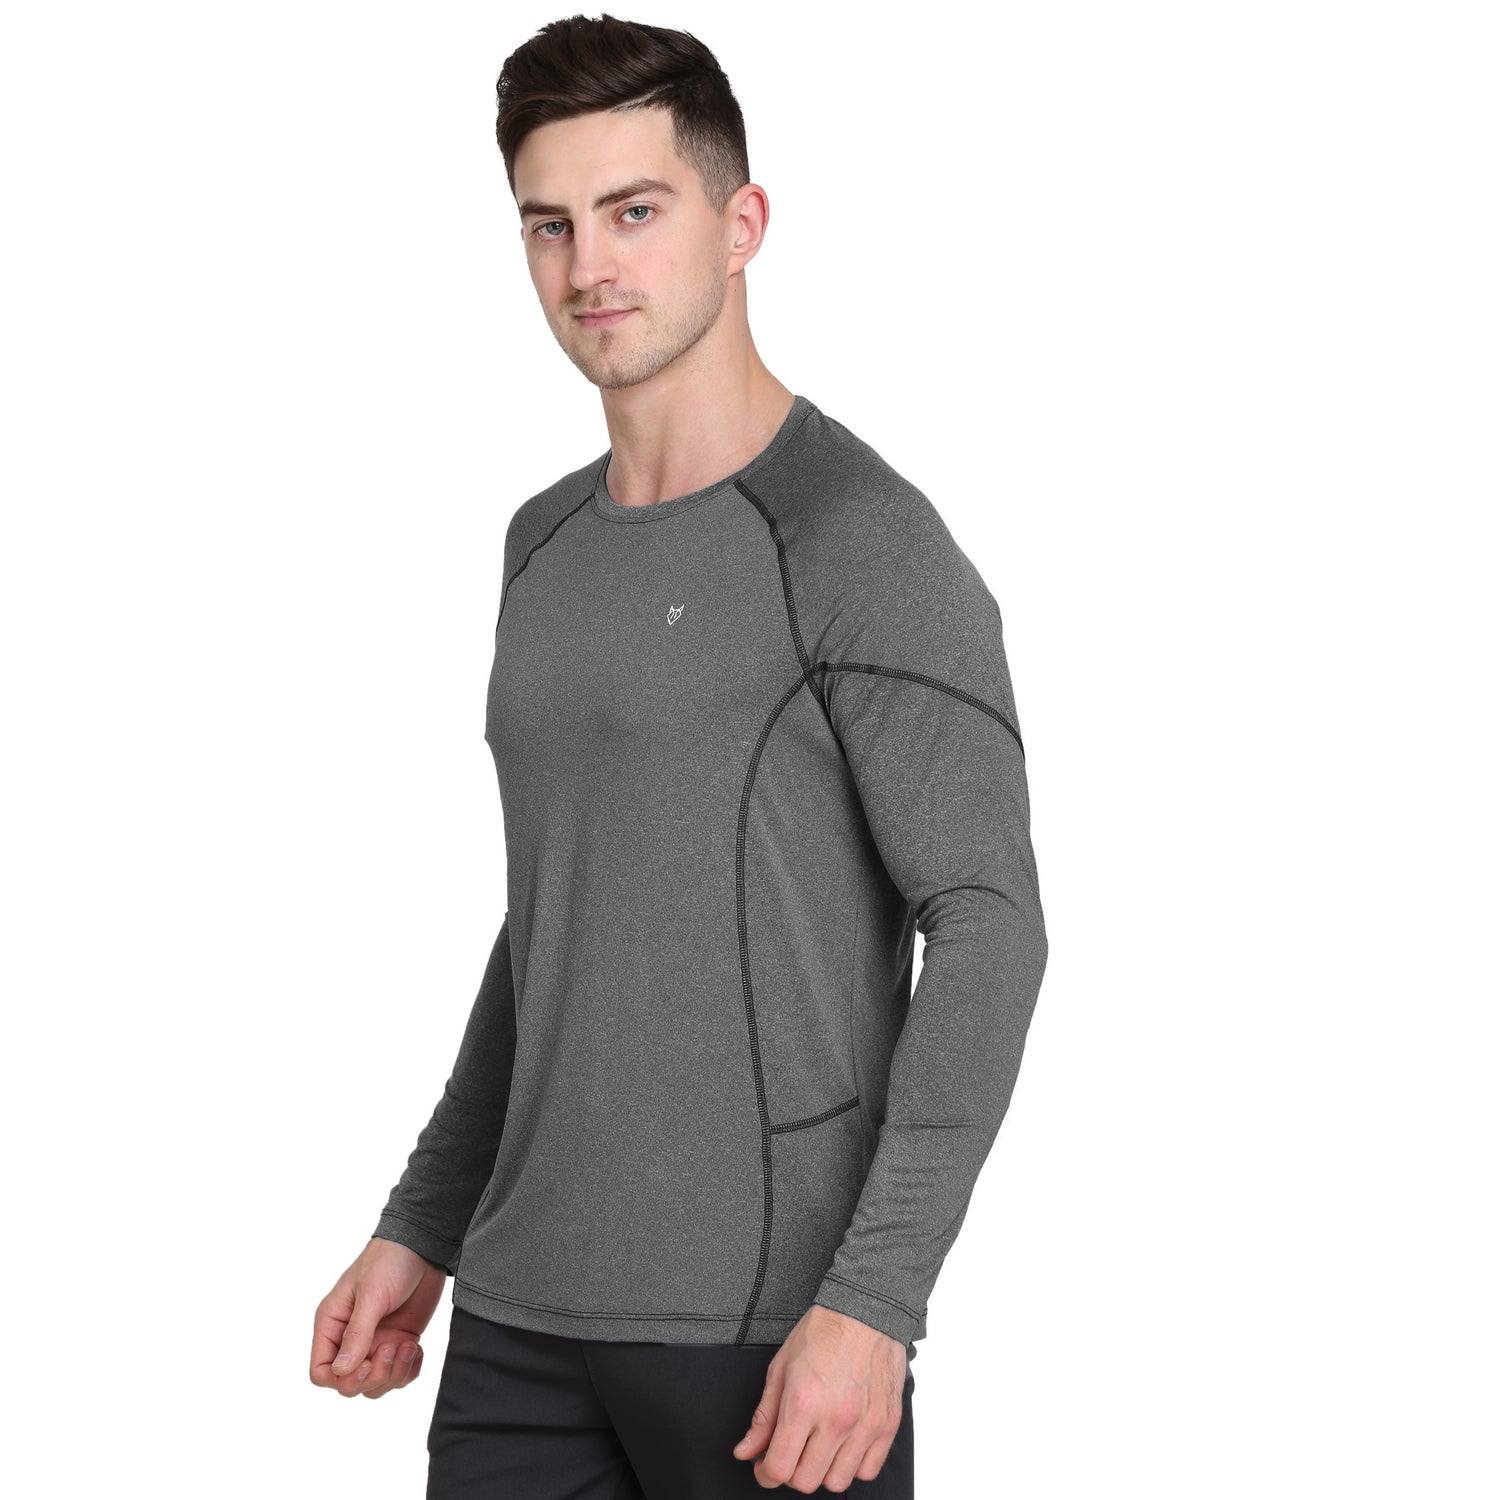 Full sleeves Gym T-shirt for Men | Sweat absorbing | Ultra cool stretch stylish Men's Tshirt